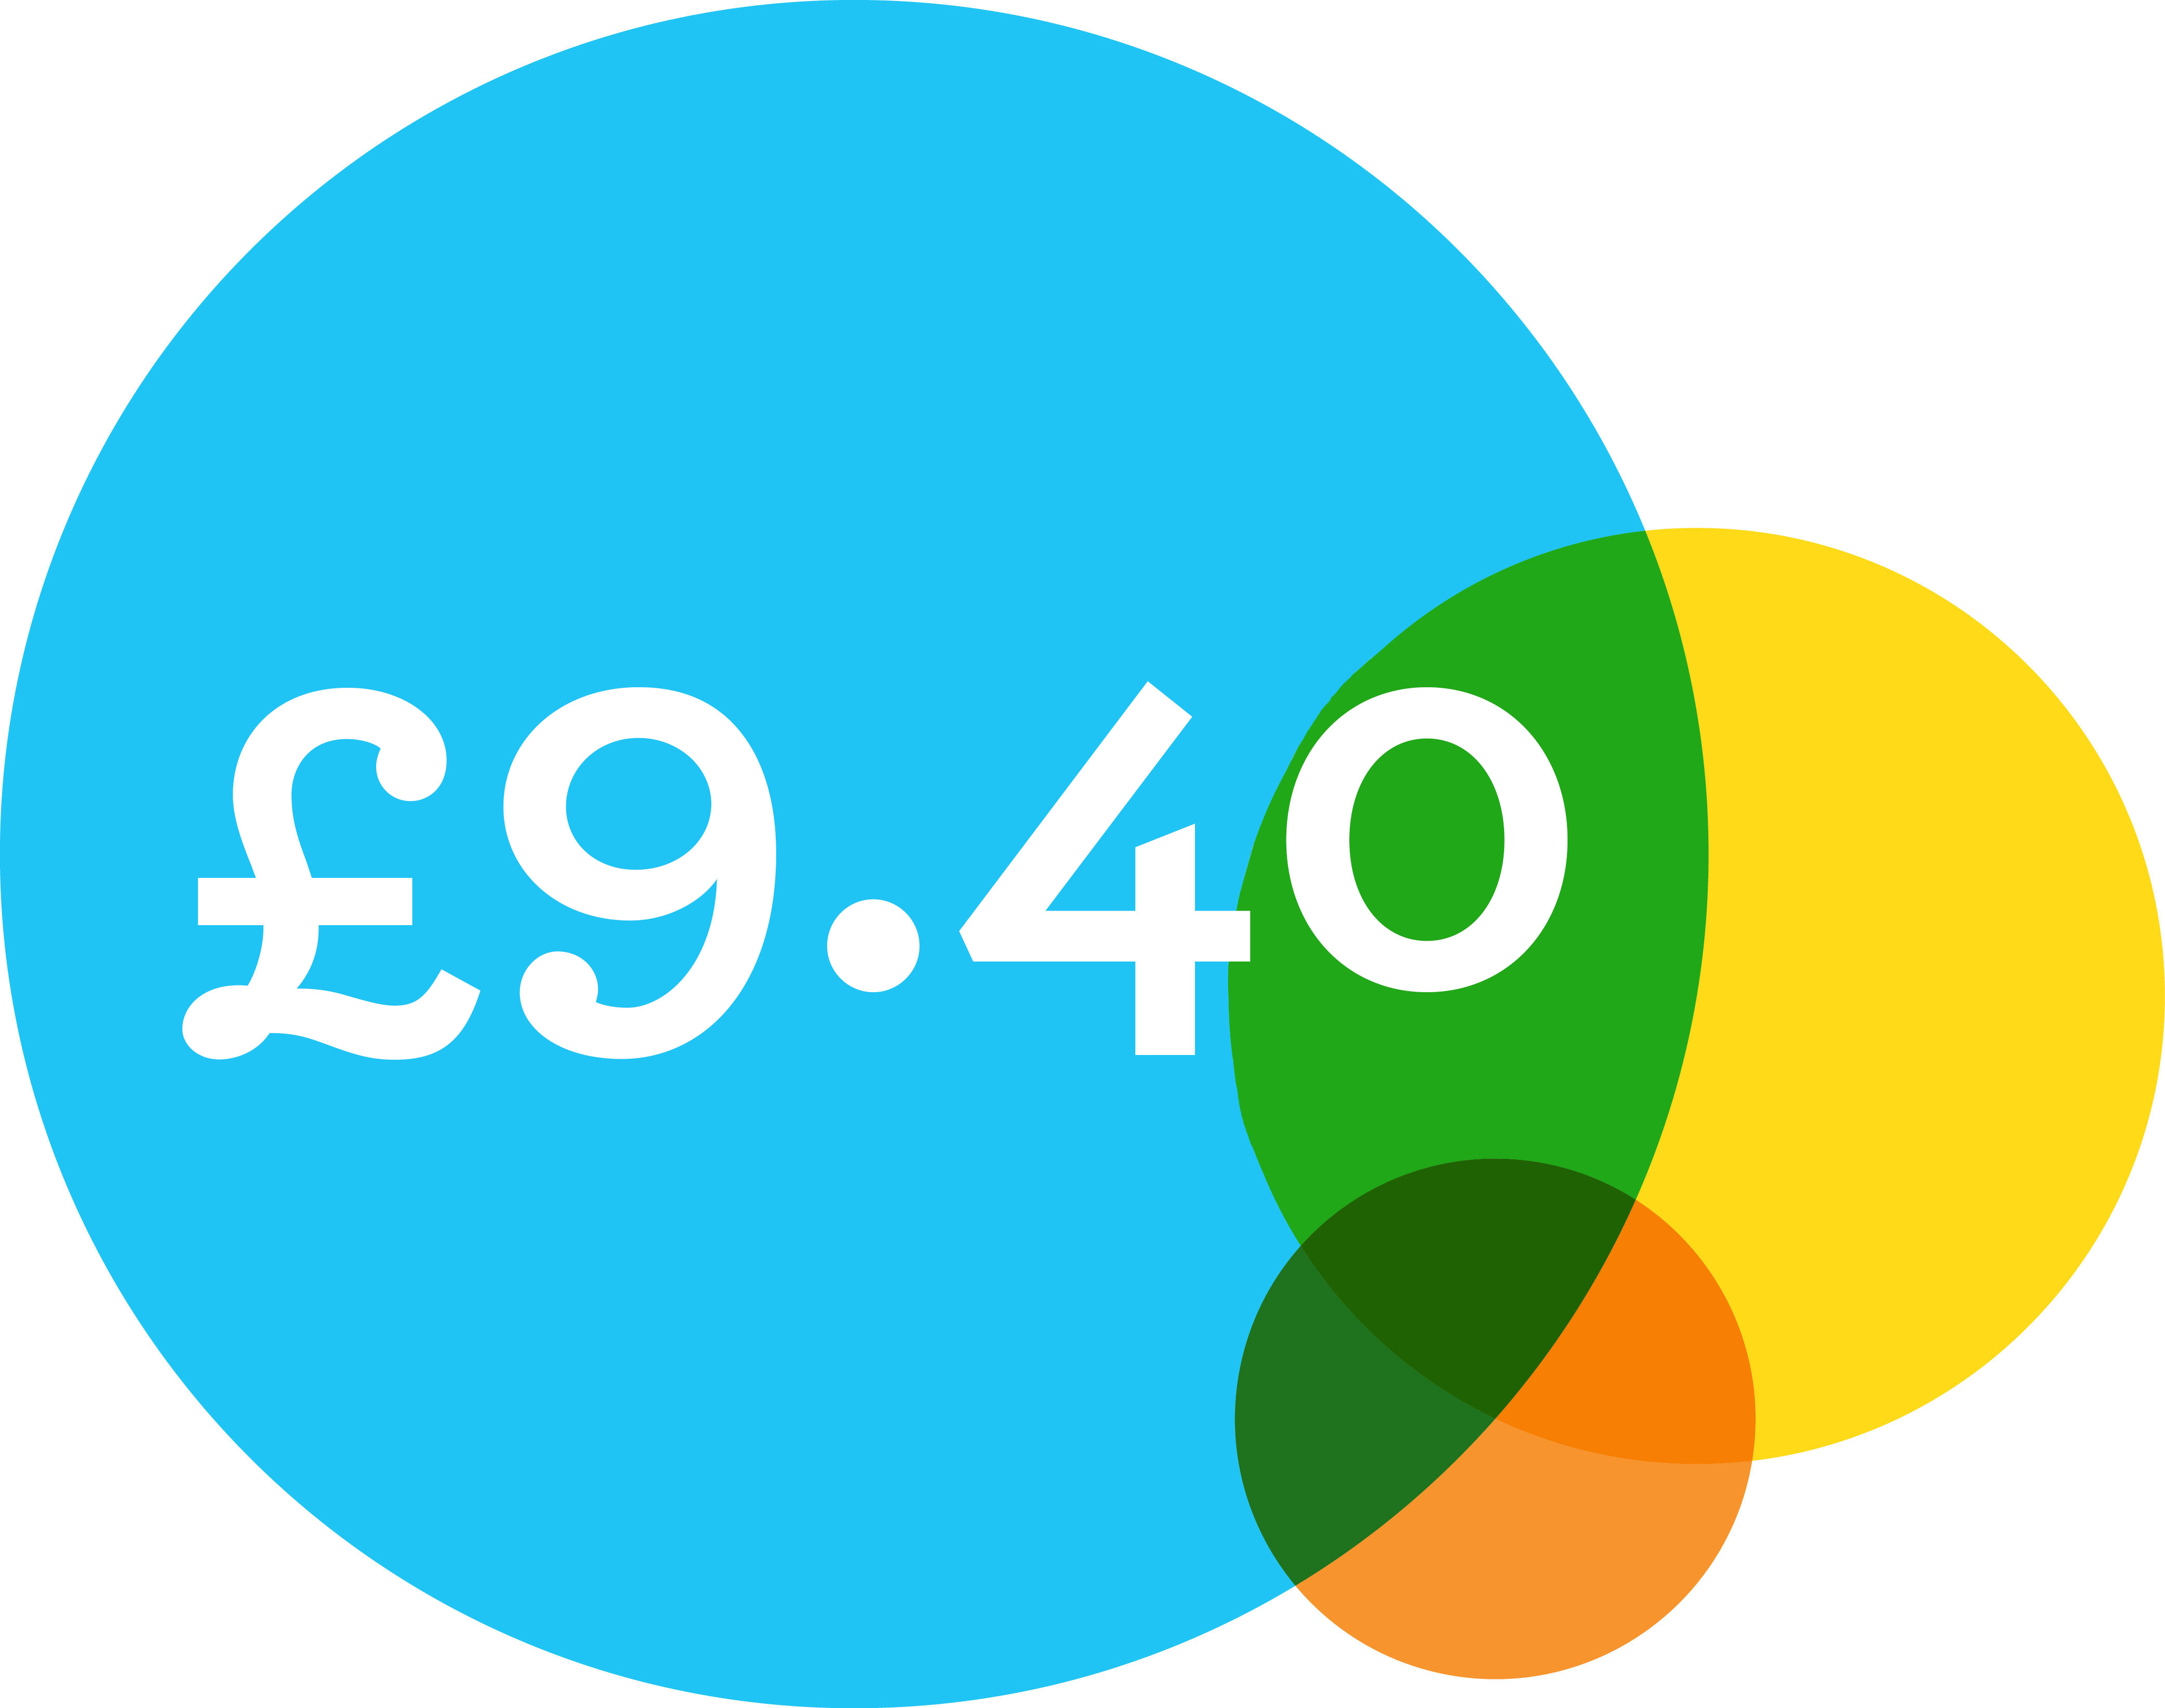 The new London Living Wage rate has been announced! Living Wage